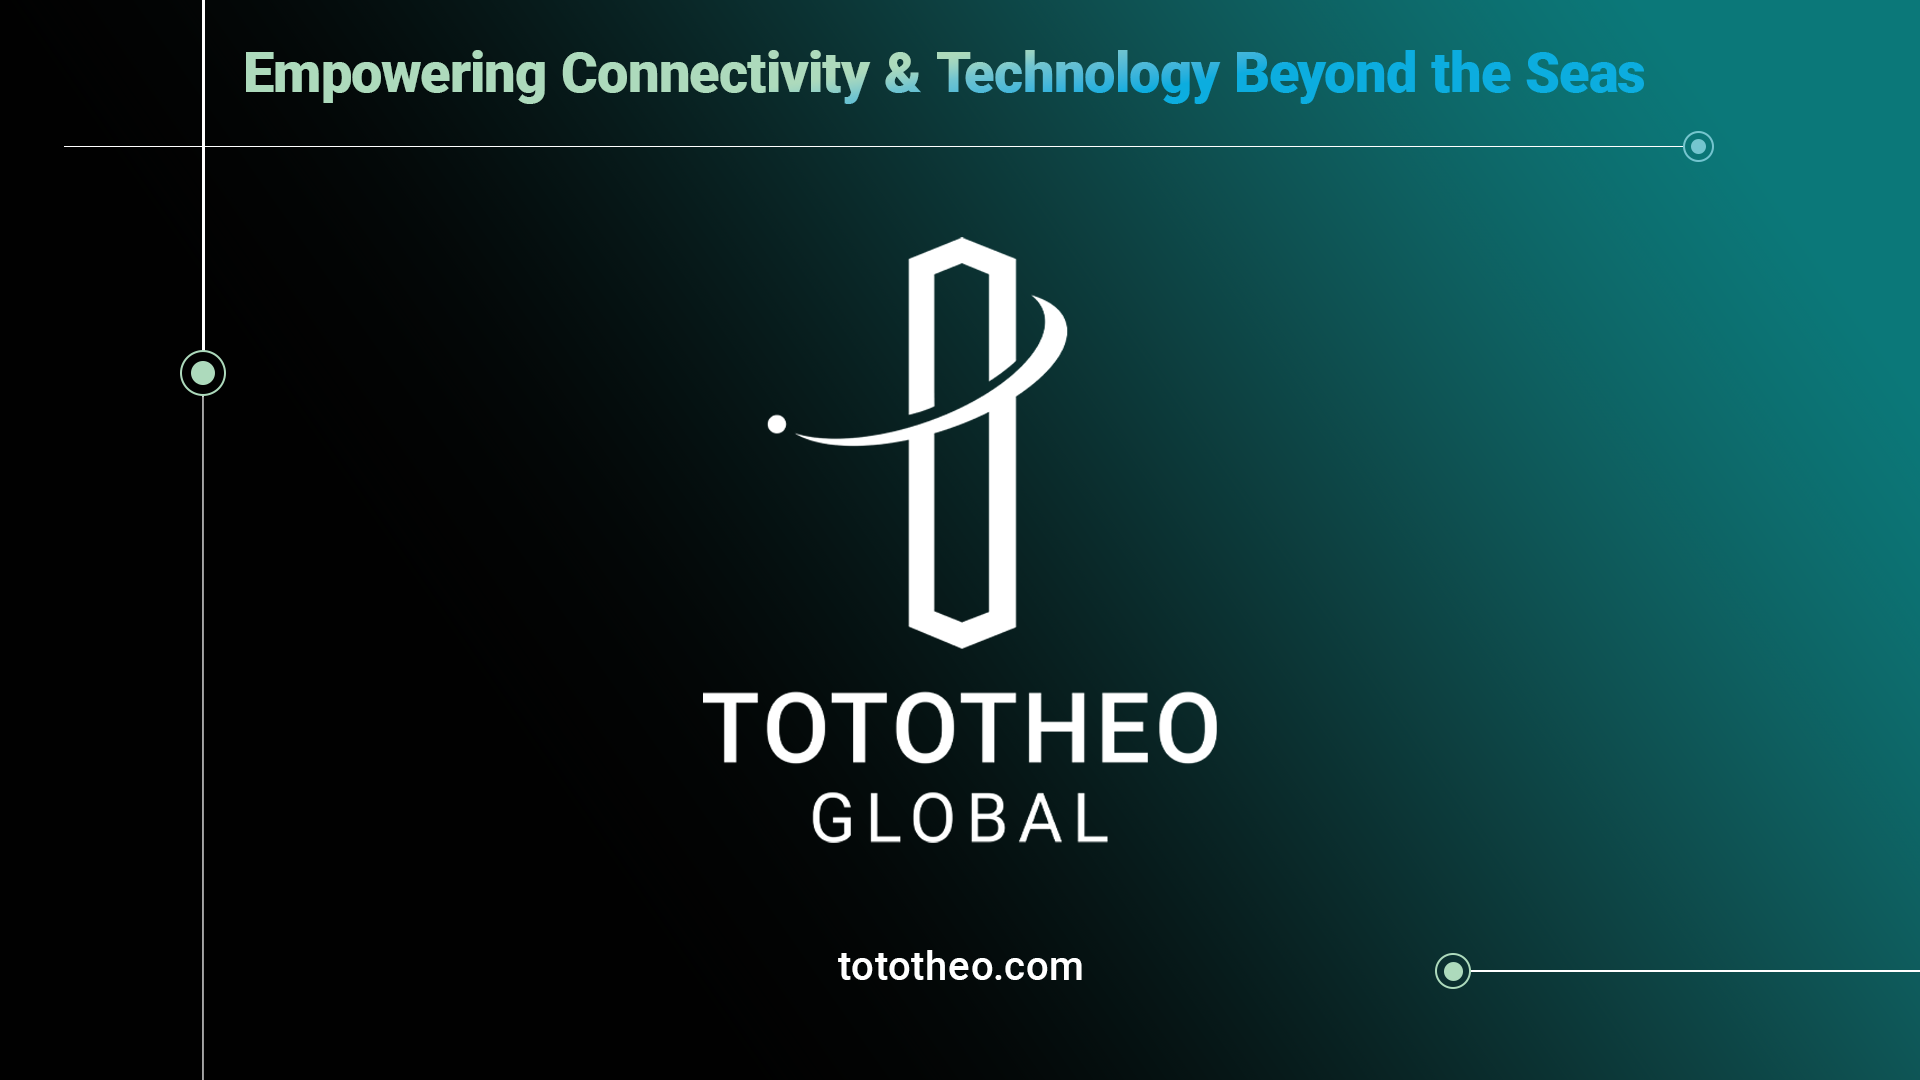 Tototheo Global launches, expanding horizons beyond maritime Setting new standards: From maritime communications to global technology solutions